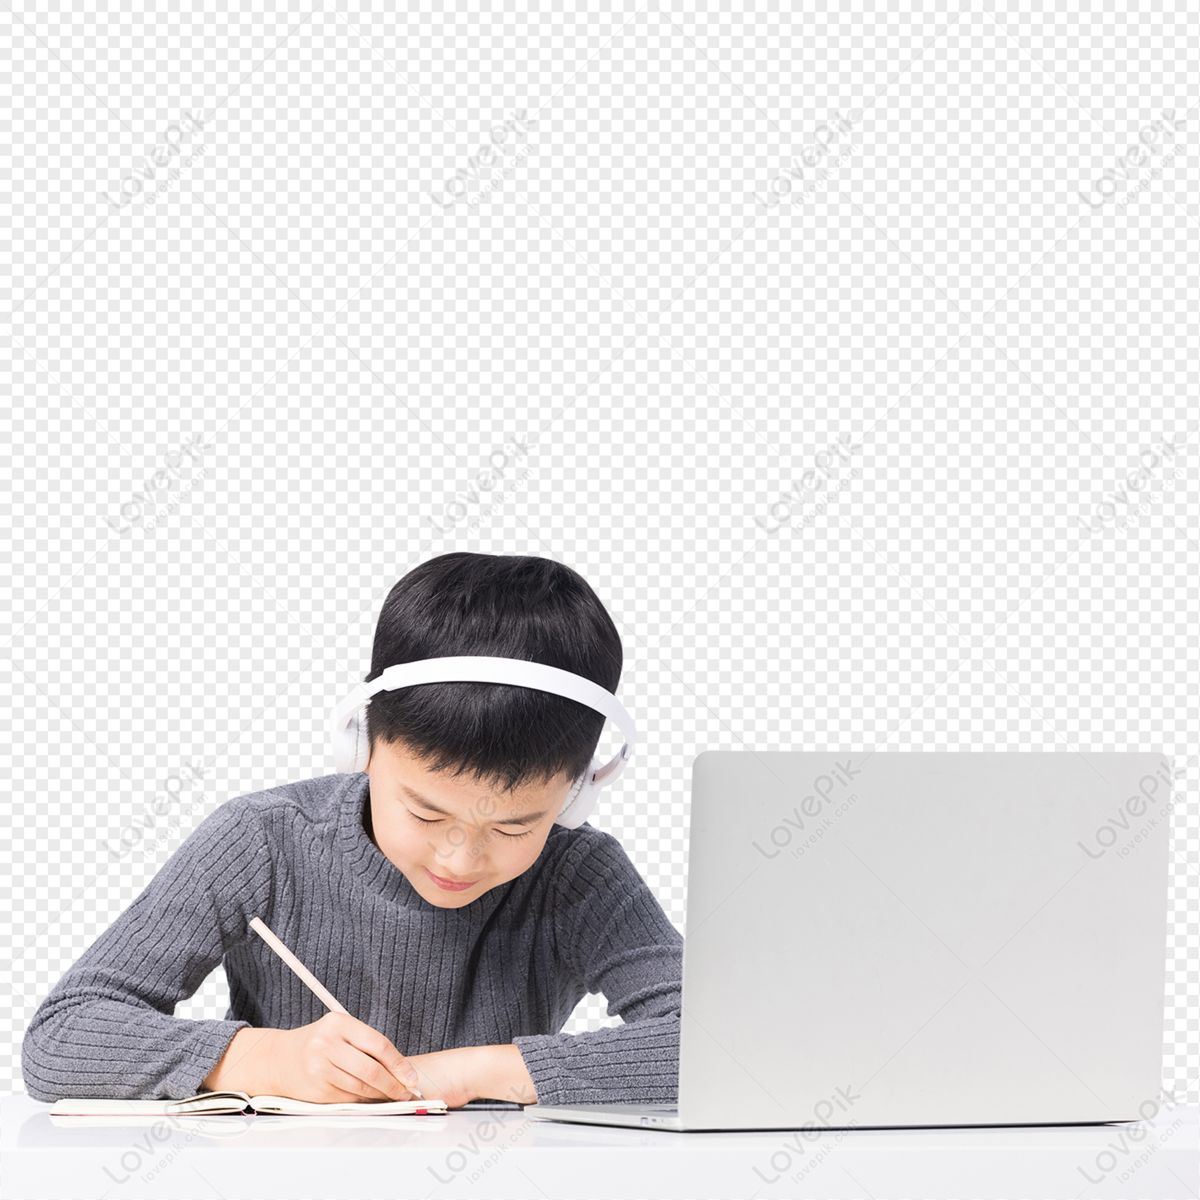 Primary school students write homework in online class at home, and homework, epidemic prevention, learning style png image free download